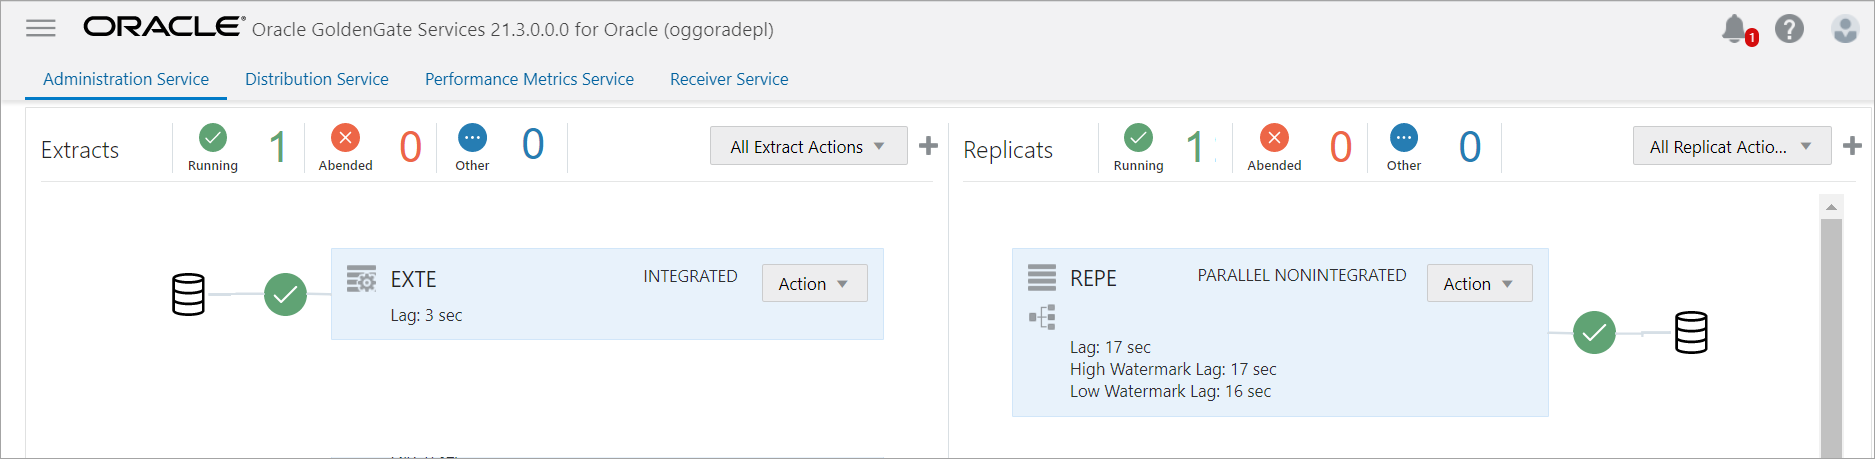 Administration Service Overview page with Extract and Replicat in running state.